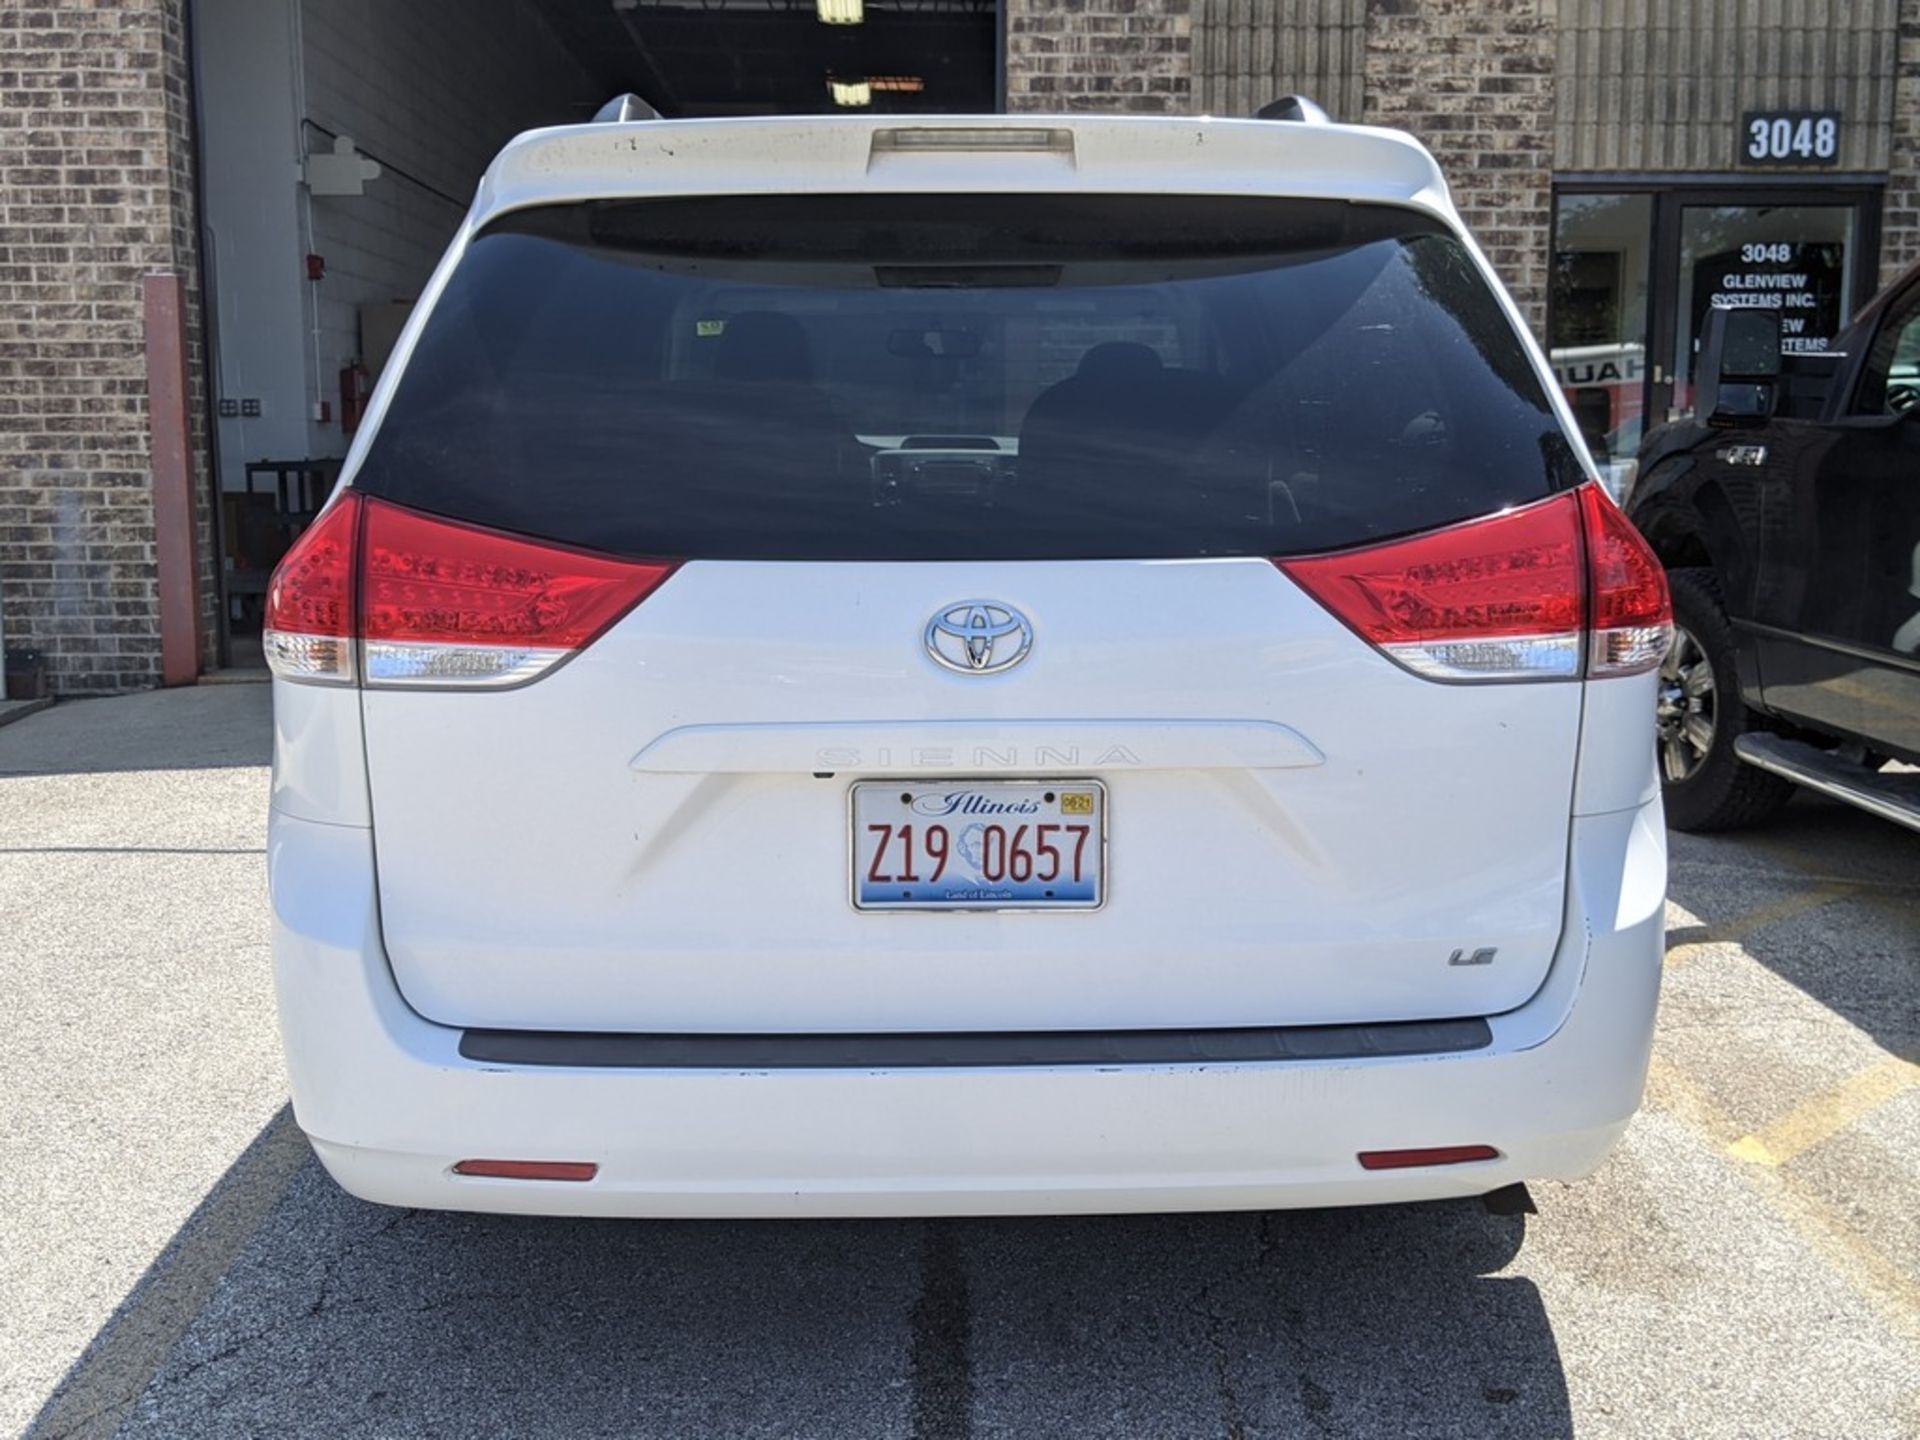 2014 TOYOTA MODEL SIENNA LE VAN, VIN: 5TDKK3DCXES482912, AUTOMATIC TRANSMISSION, APPROX. 240,000 - Image 4 of 14